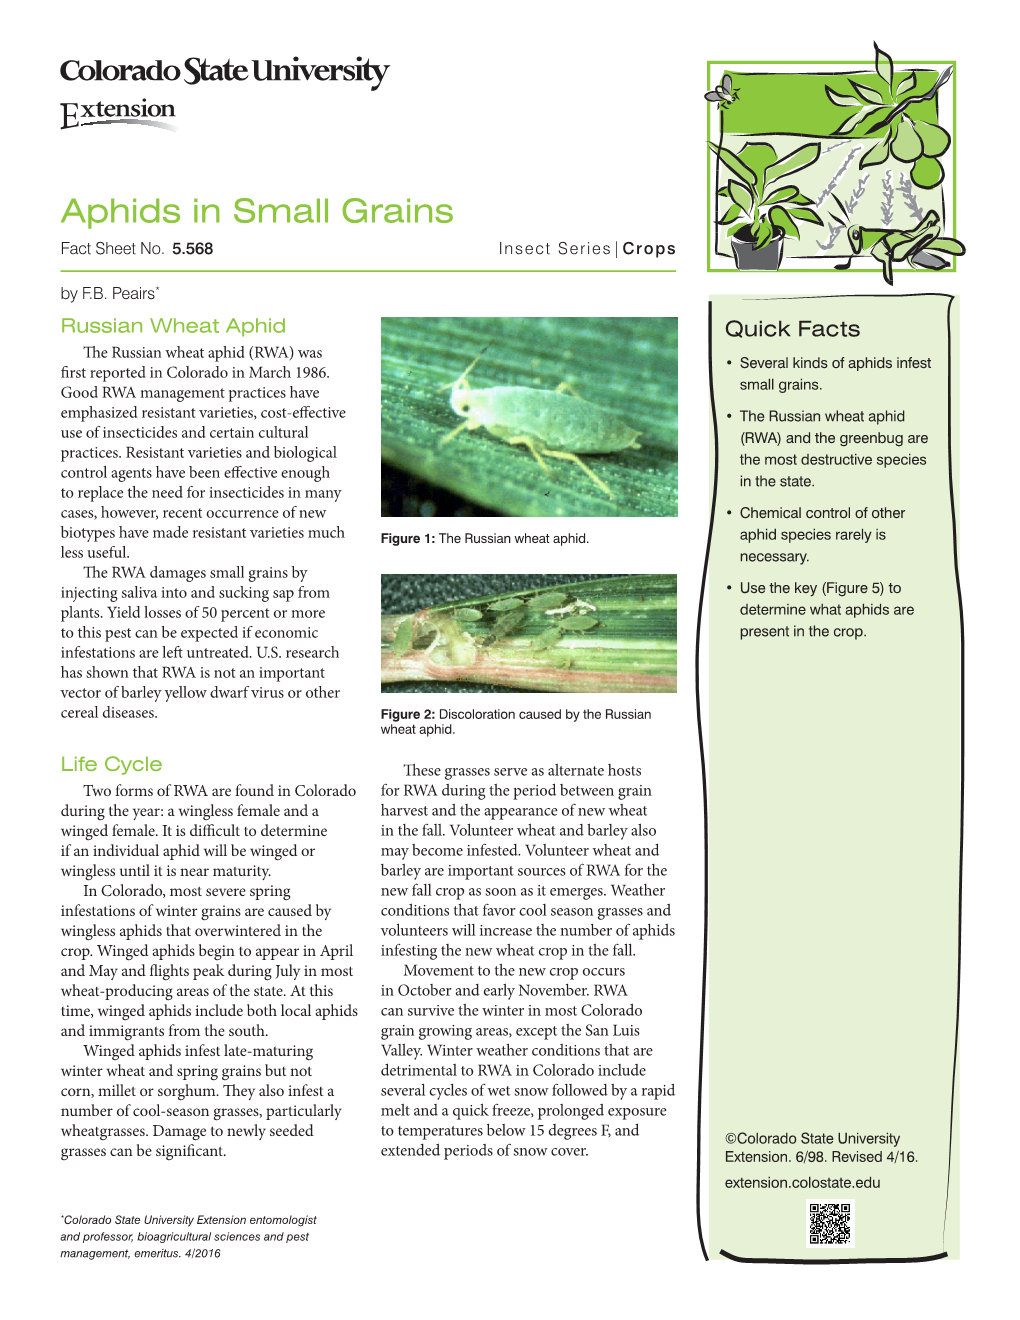 Aphids in Small Grains Fact Sheet No